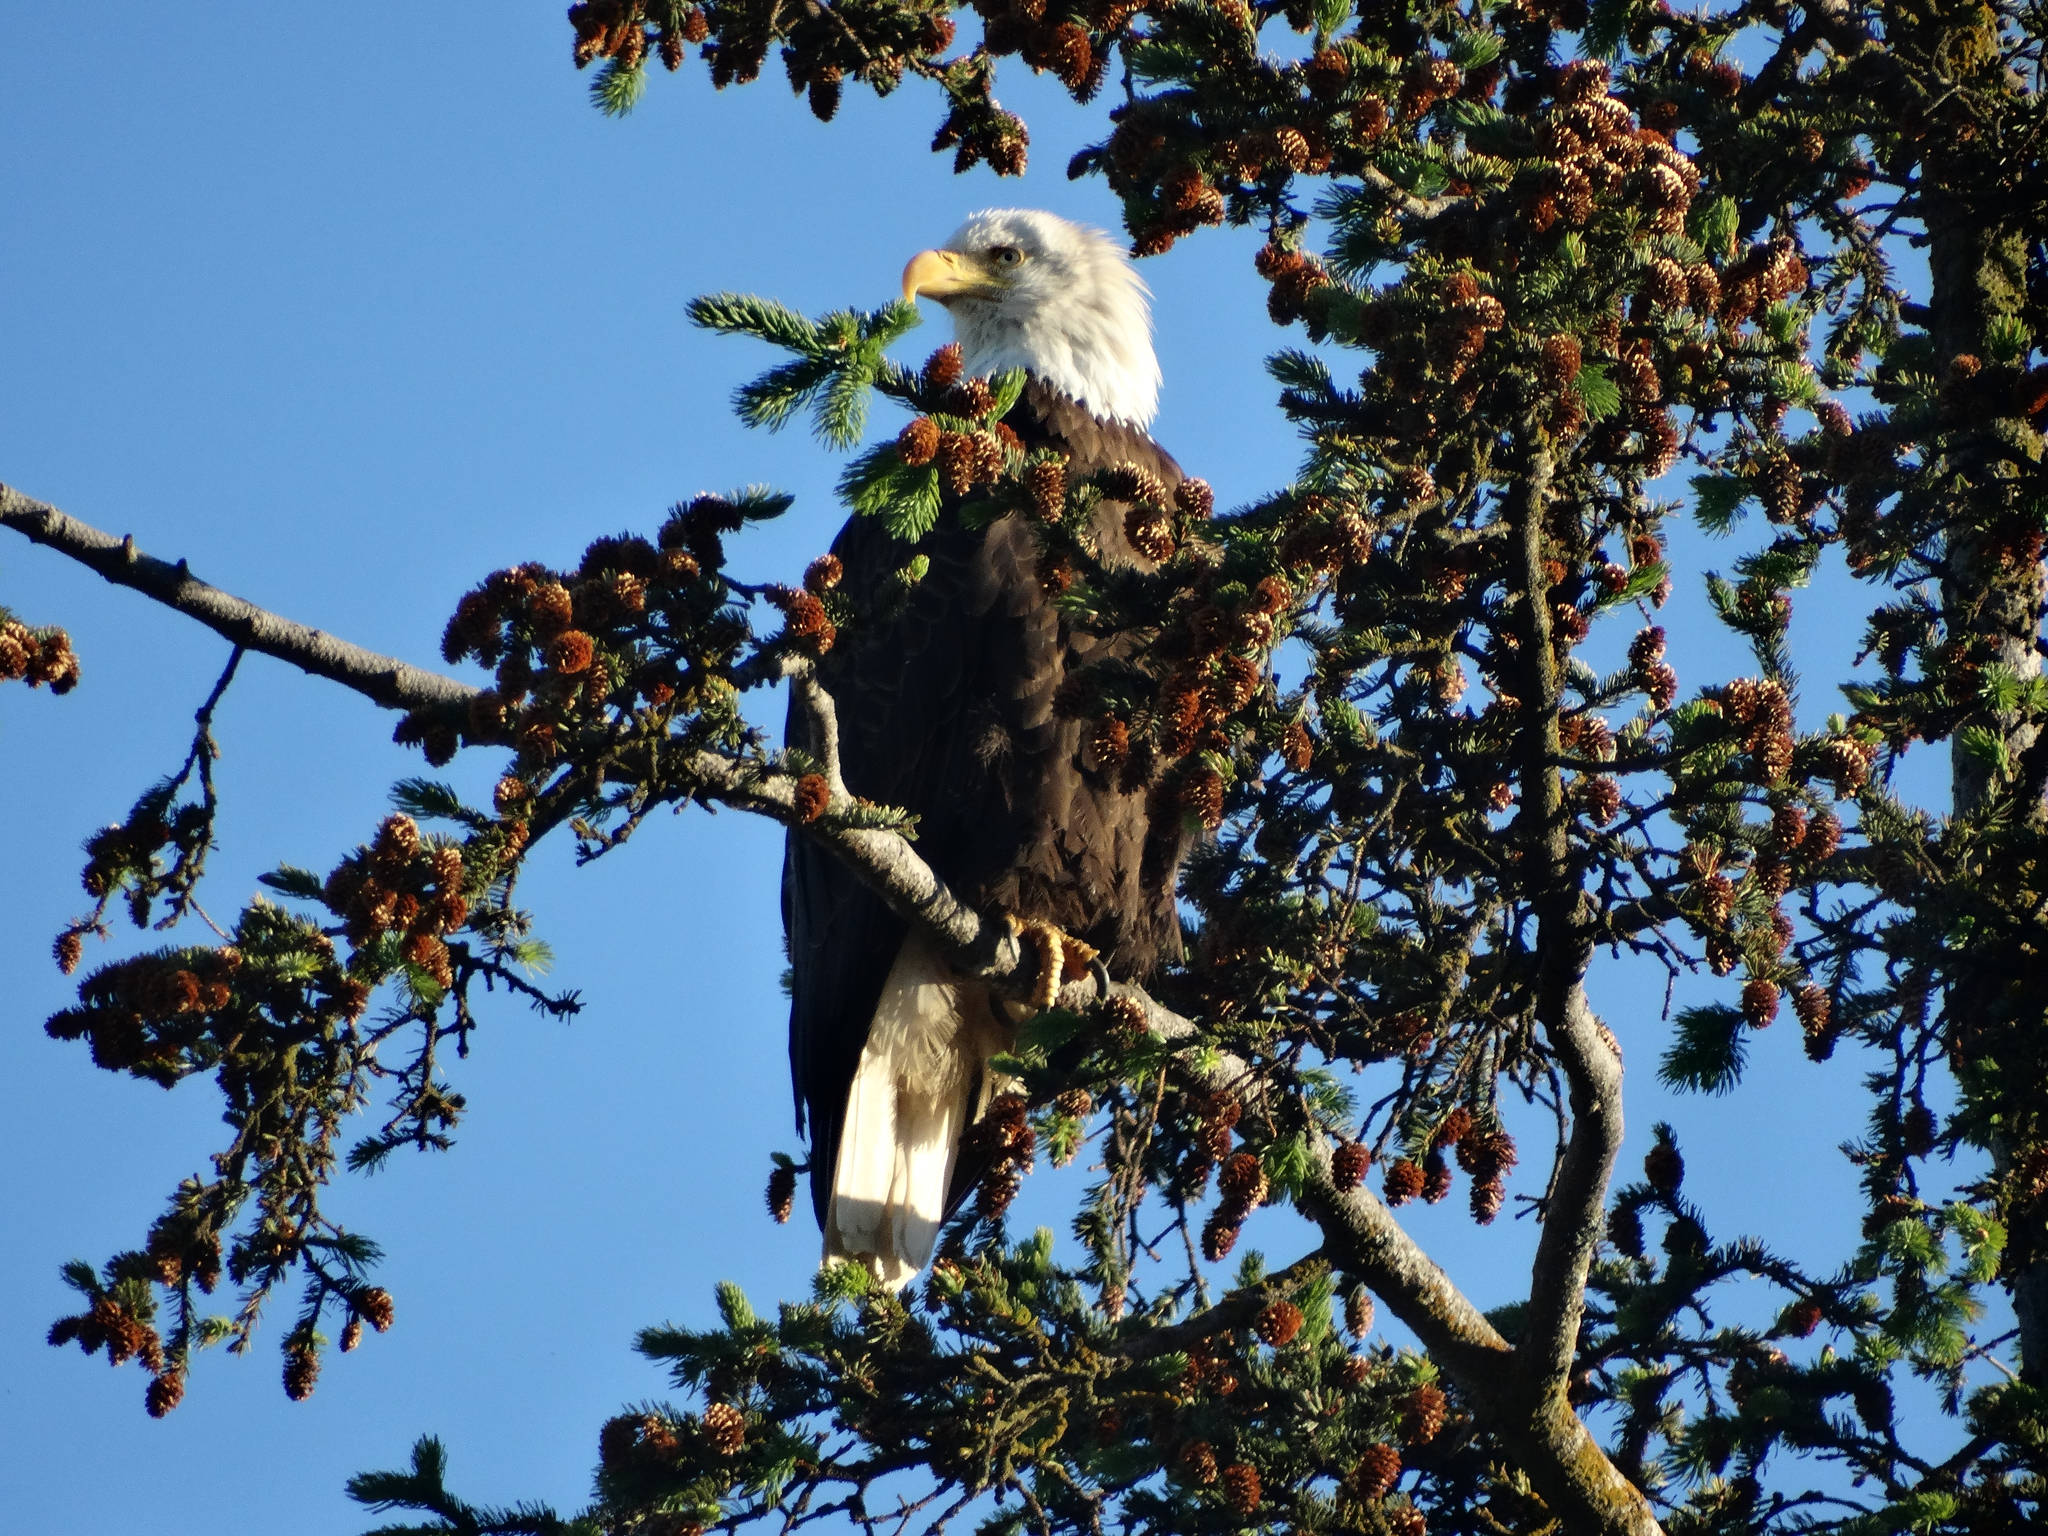 A bald eagle sits near its nest by the Homer motorhome dump on June 24, 2017, across the Sterling Highway from the Homer Post Office. Since 2010, a pair of bald eagles has nested in the area near Beluga Slough south of the Lake Street and Sterling Highway intersection. The first nest was destroyed when the tree fell down in a winter storm. In 2012 the eagles built a new nest across from the Homer Post Office by the motorhome dump station. In 2014 they built another nest in a new tree closer to the slough. In 2016 they built another nest, but in 2017 moved back to the post office location. Photo by Peter MacDonald for the Homer News